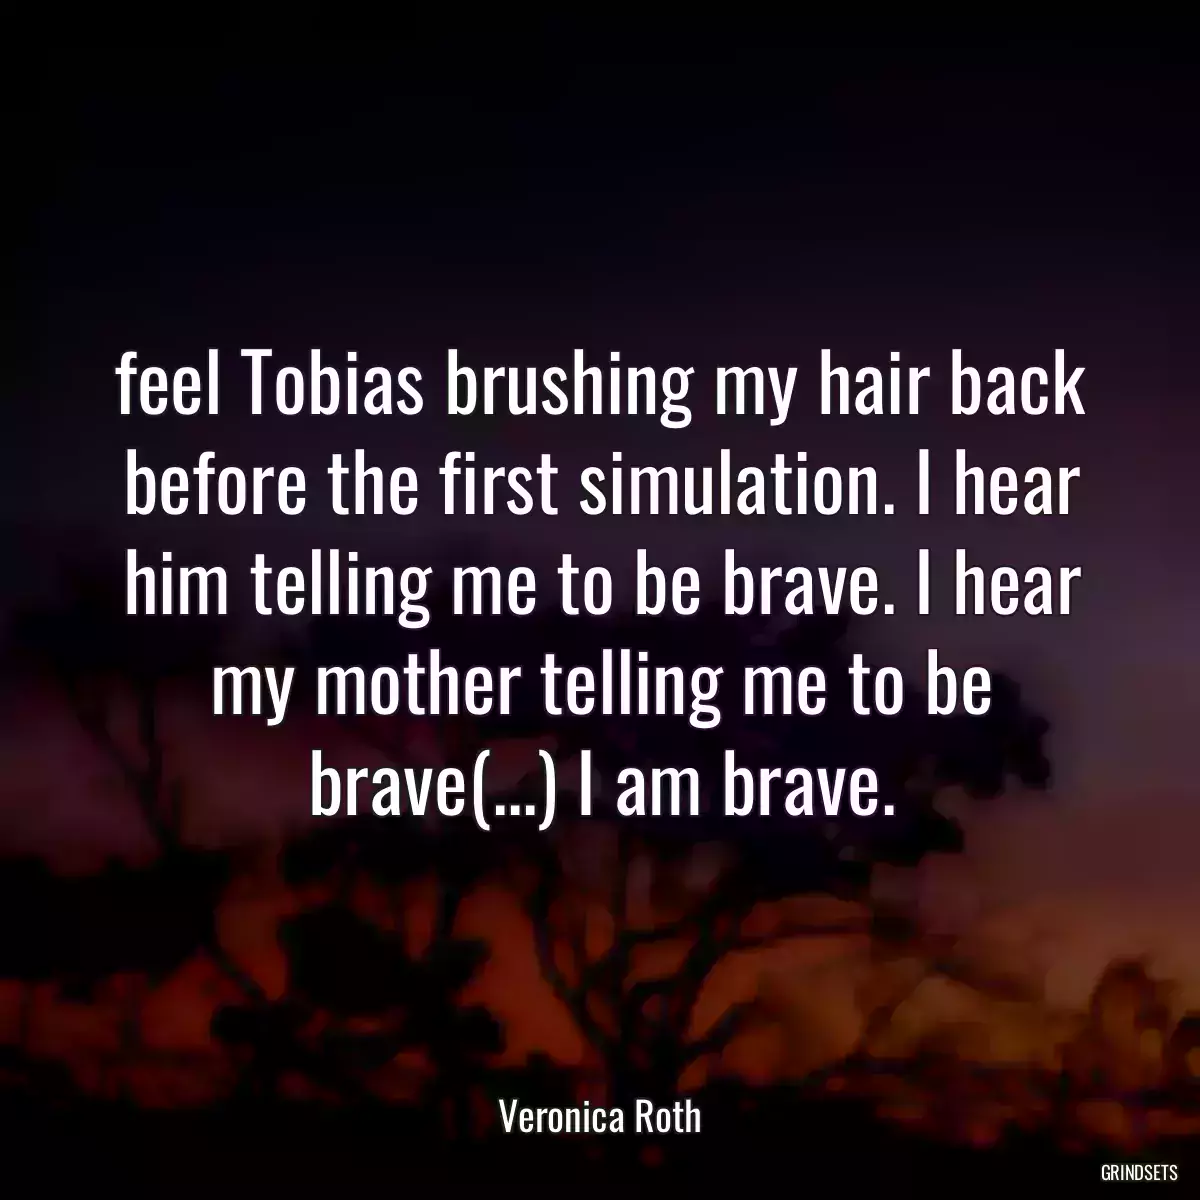 feel Tobias brushing my hair back before the first simulation. I hear him telling me to be brave. I hear my mother telling me to be brave(...) I am brave.